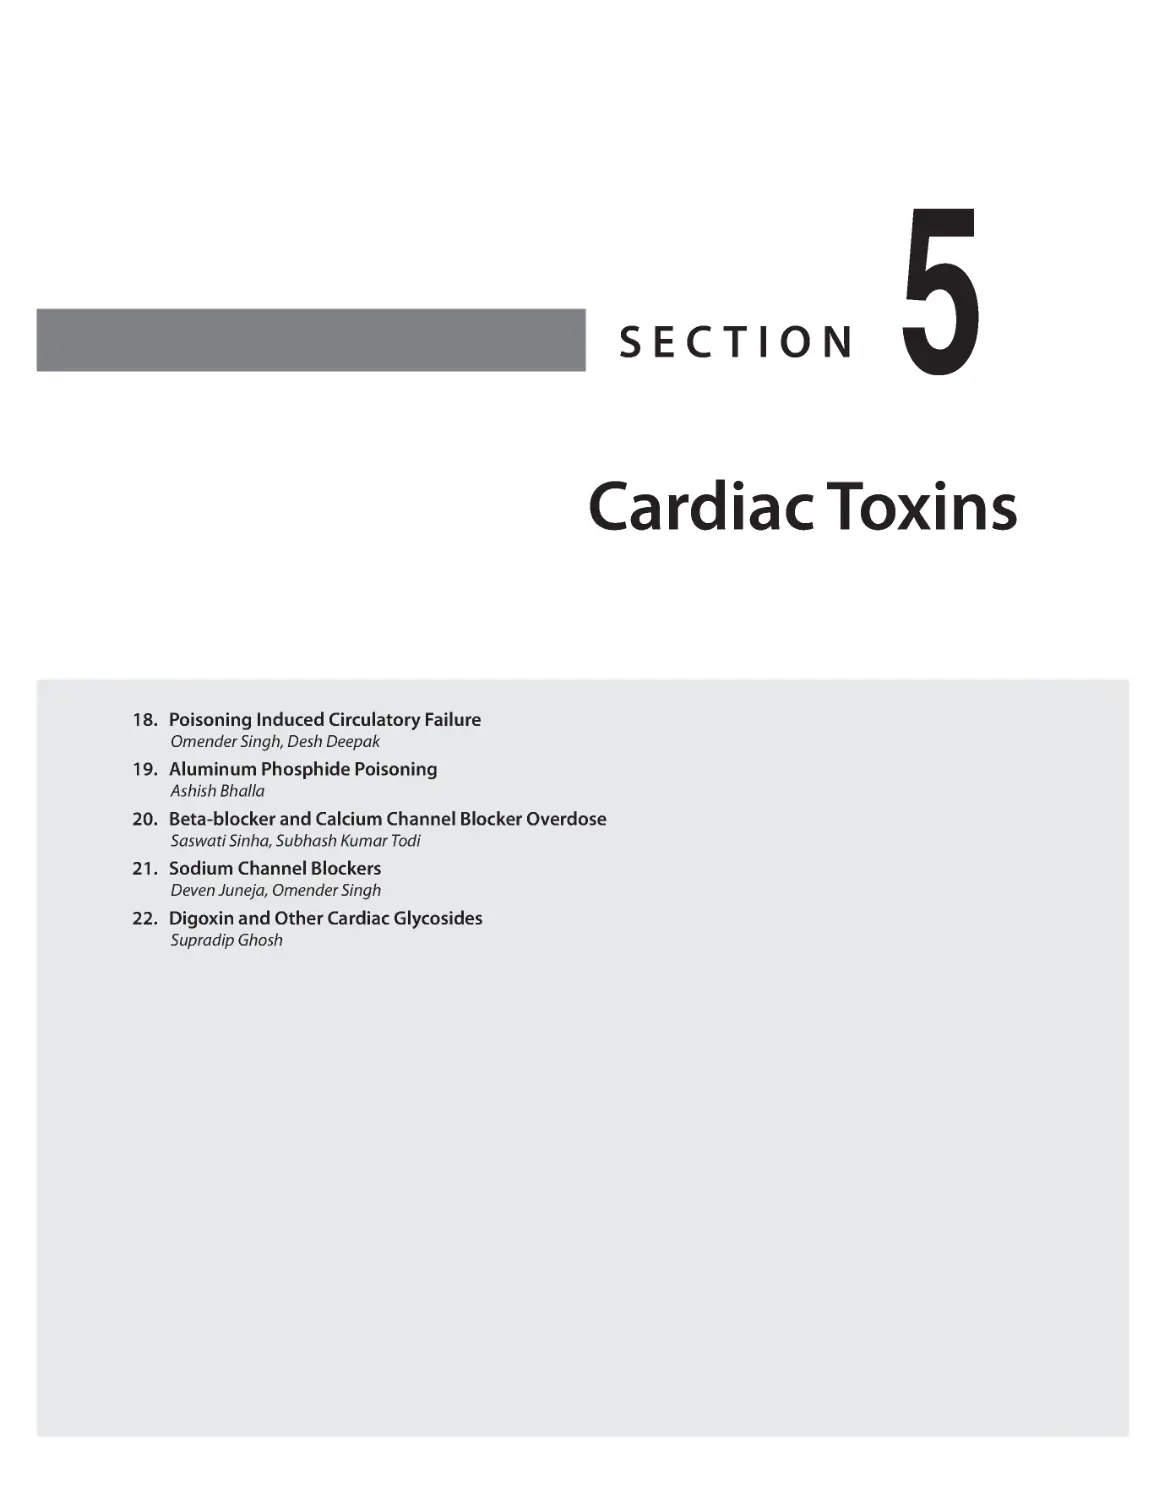 SECTION 5: Cardiac Toxins